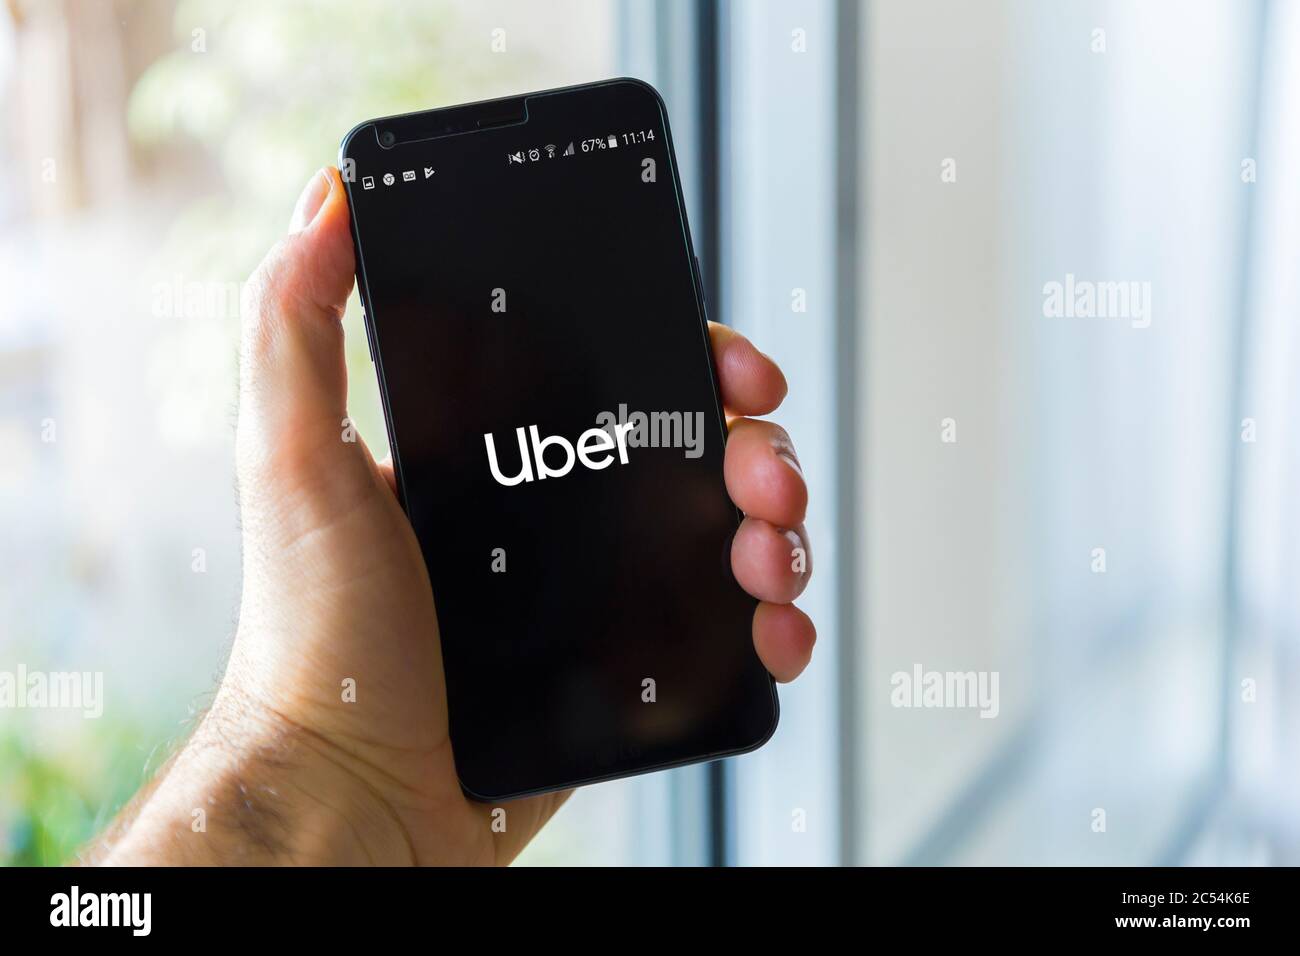 Phone showing Uber app on screen. Uber is smartphone app to rent taxi or car. International transportation network. Application. Stock Photo